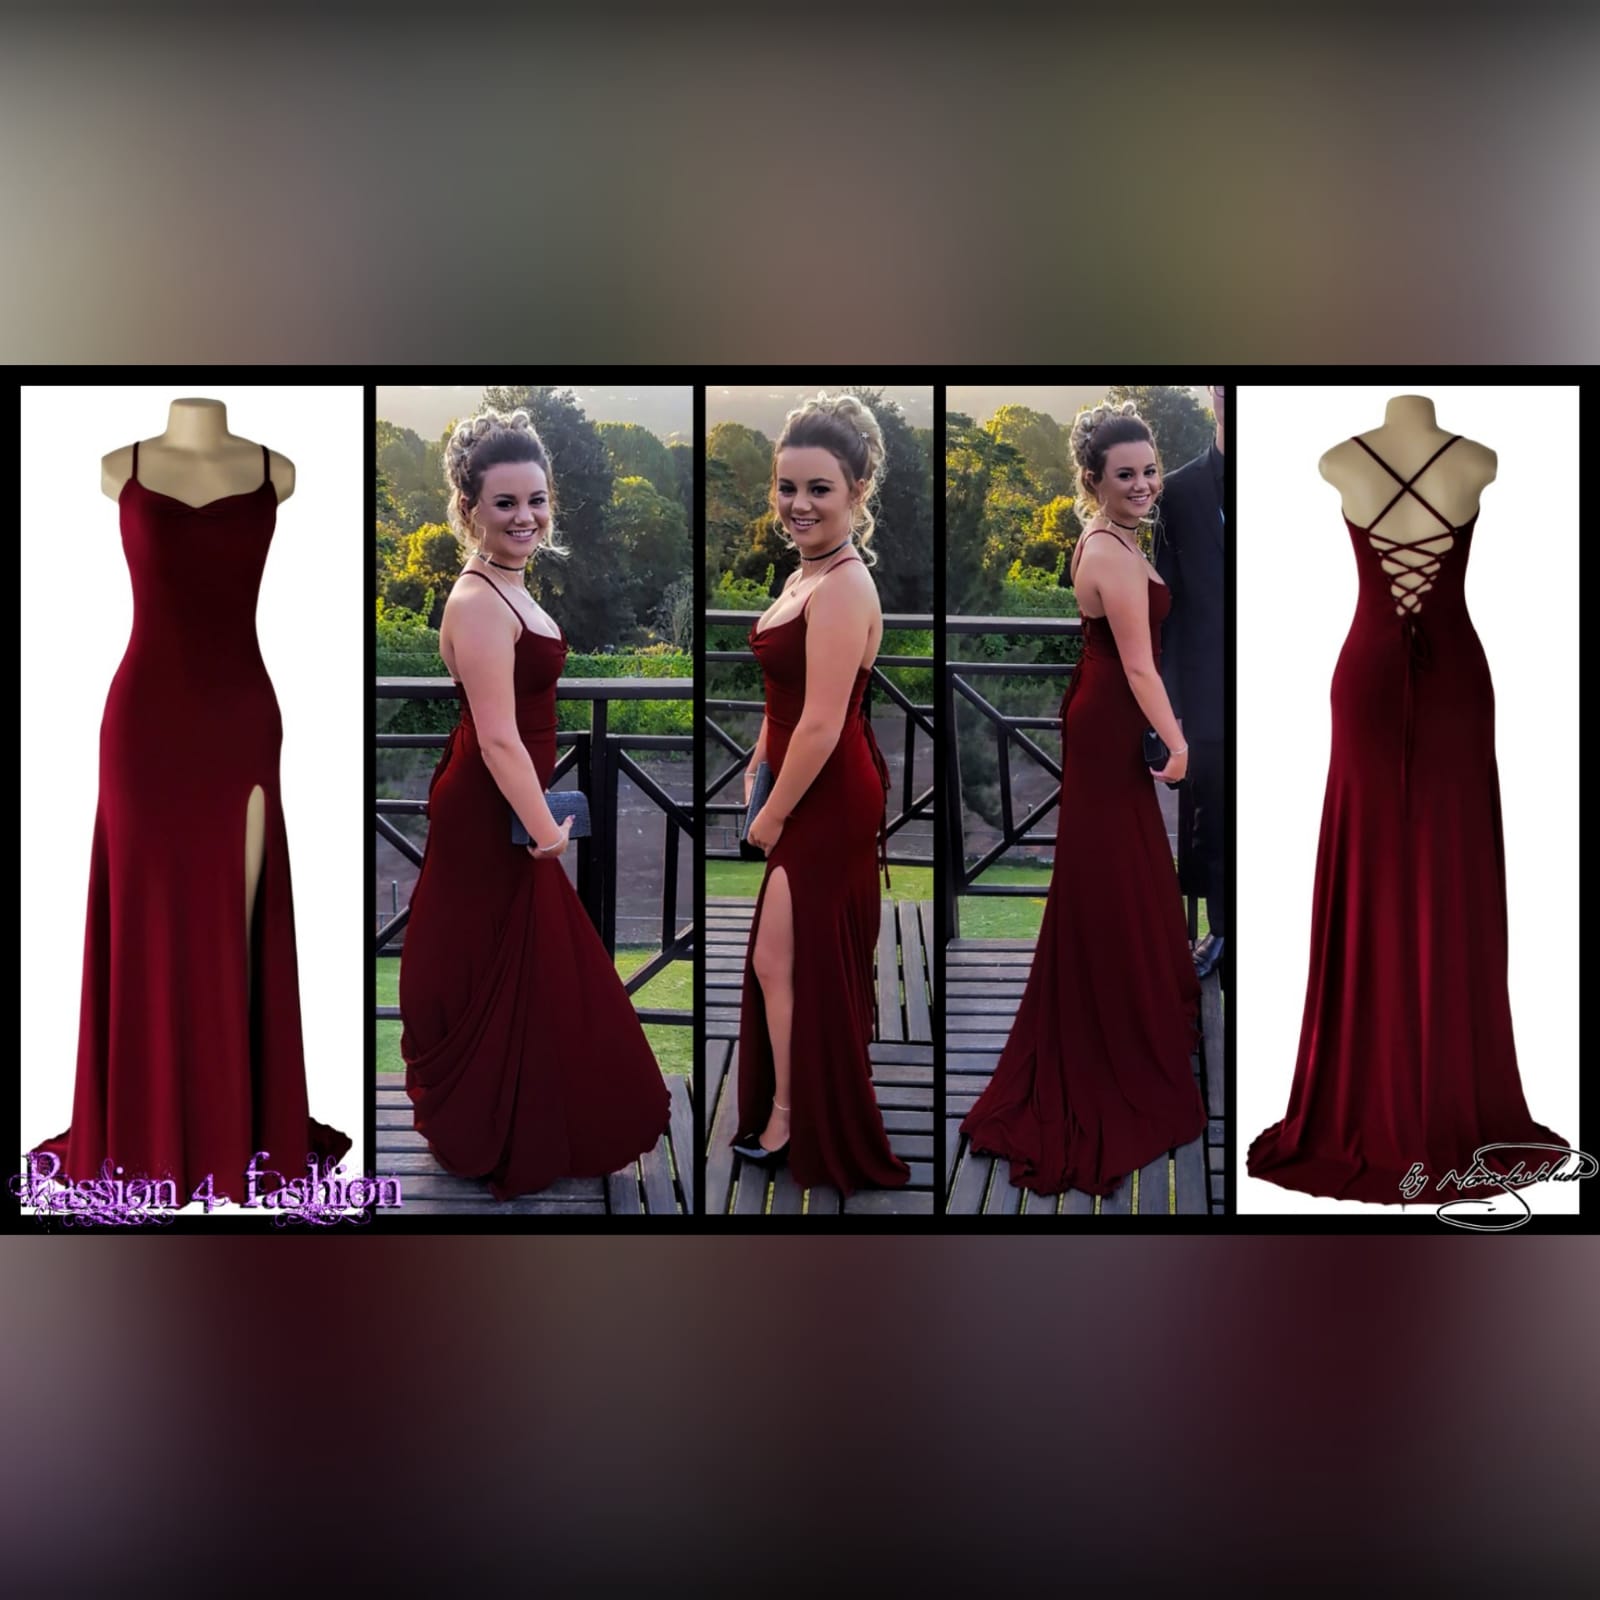 Maroon lace-up back long simple prom dress 5 maroon lace-up back long simple prom dress with thin shoulder straps, high slit and a small train. Lace-up back to adjust the fit.